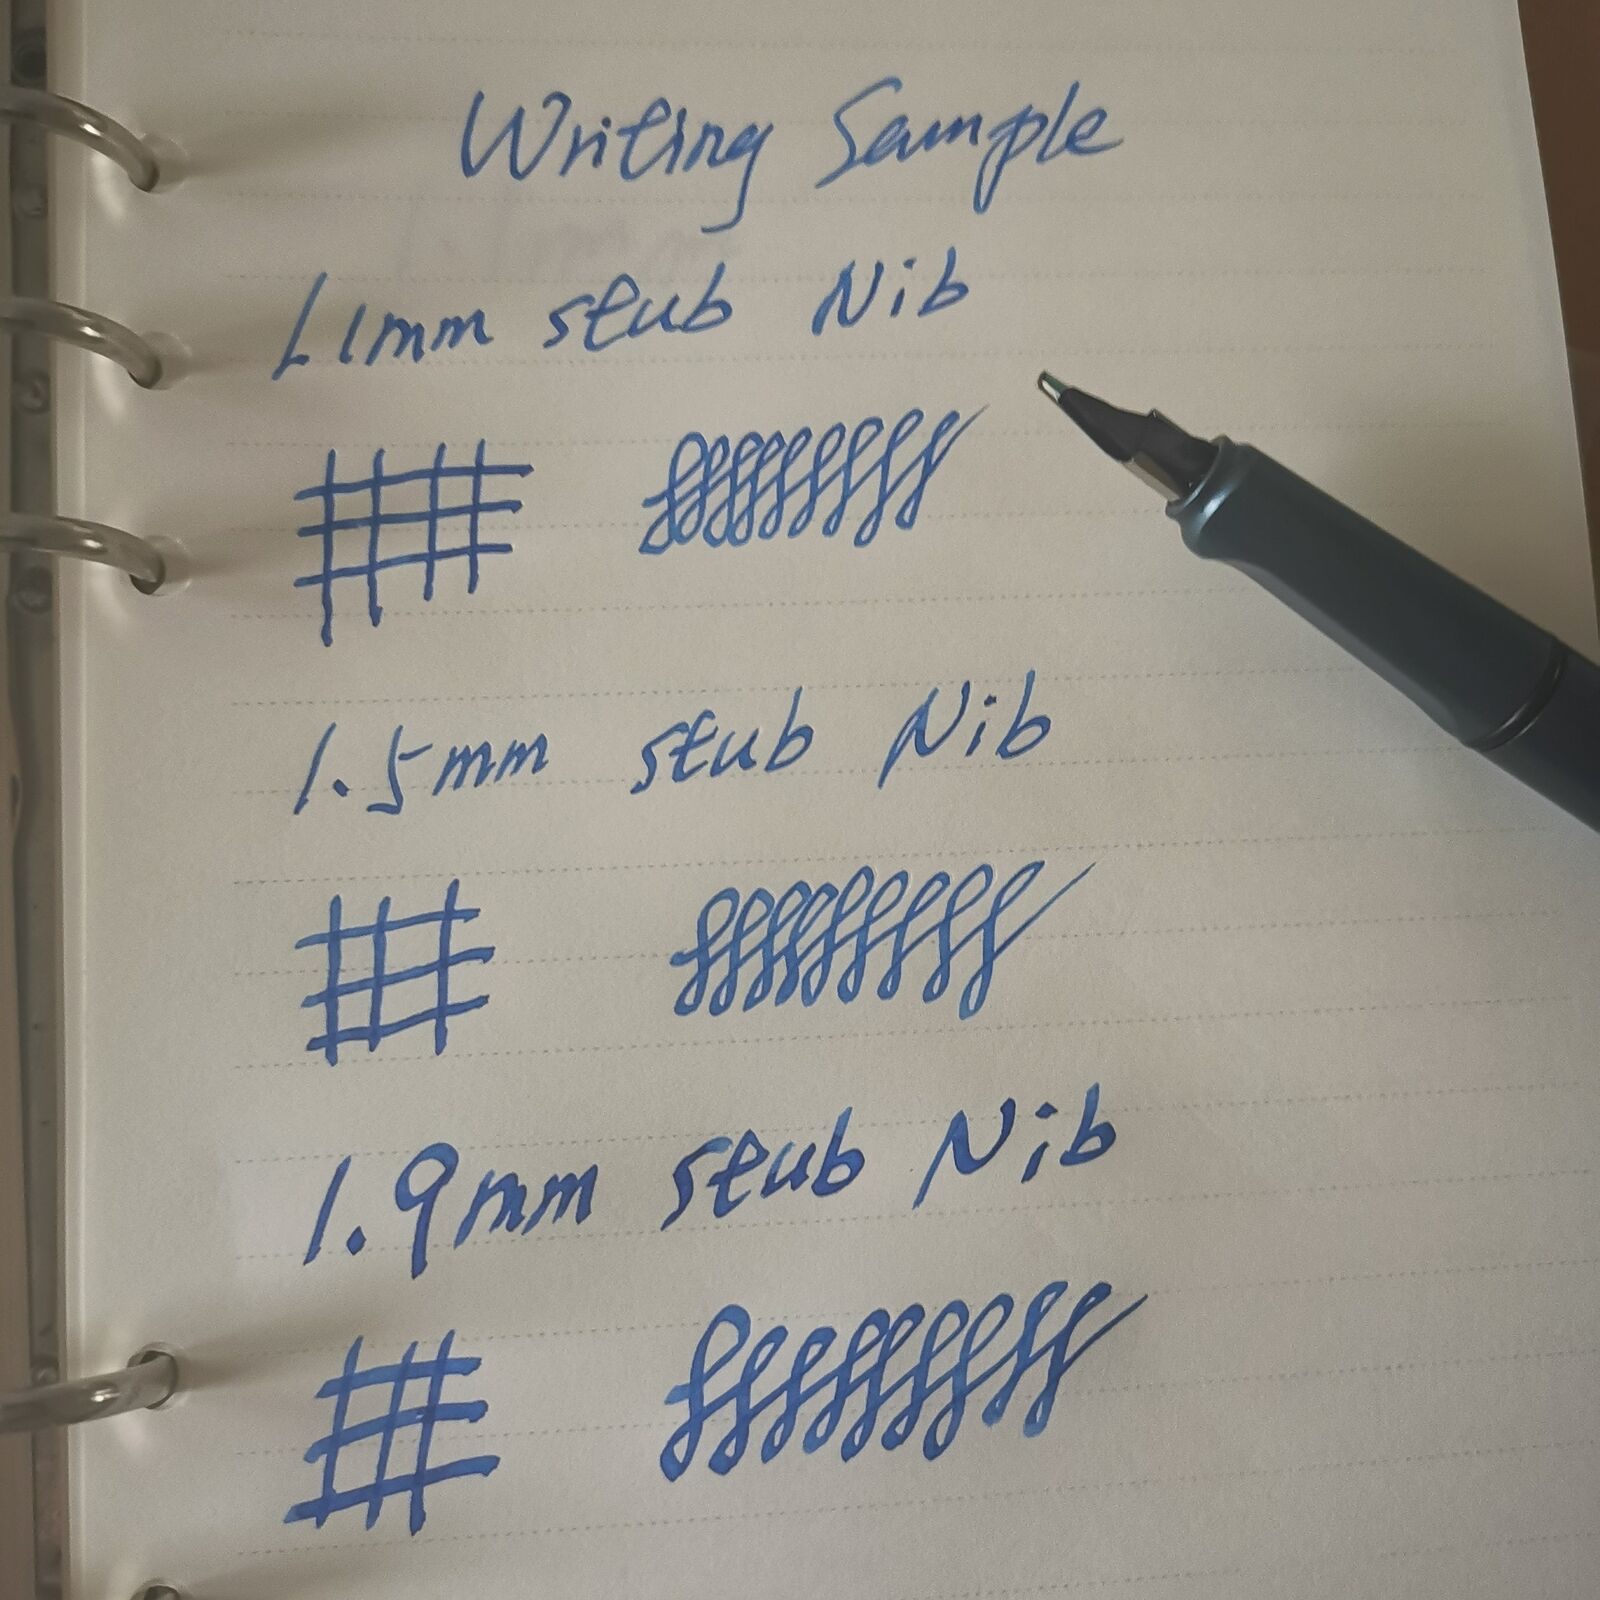 1.1mm/1.5mm/1.9mm Stub Nibs Or Feed For Lamy/wing Sung 3008/hero 359